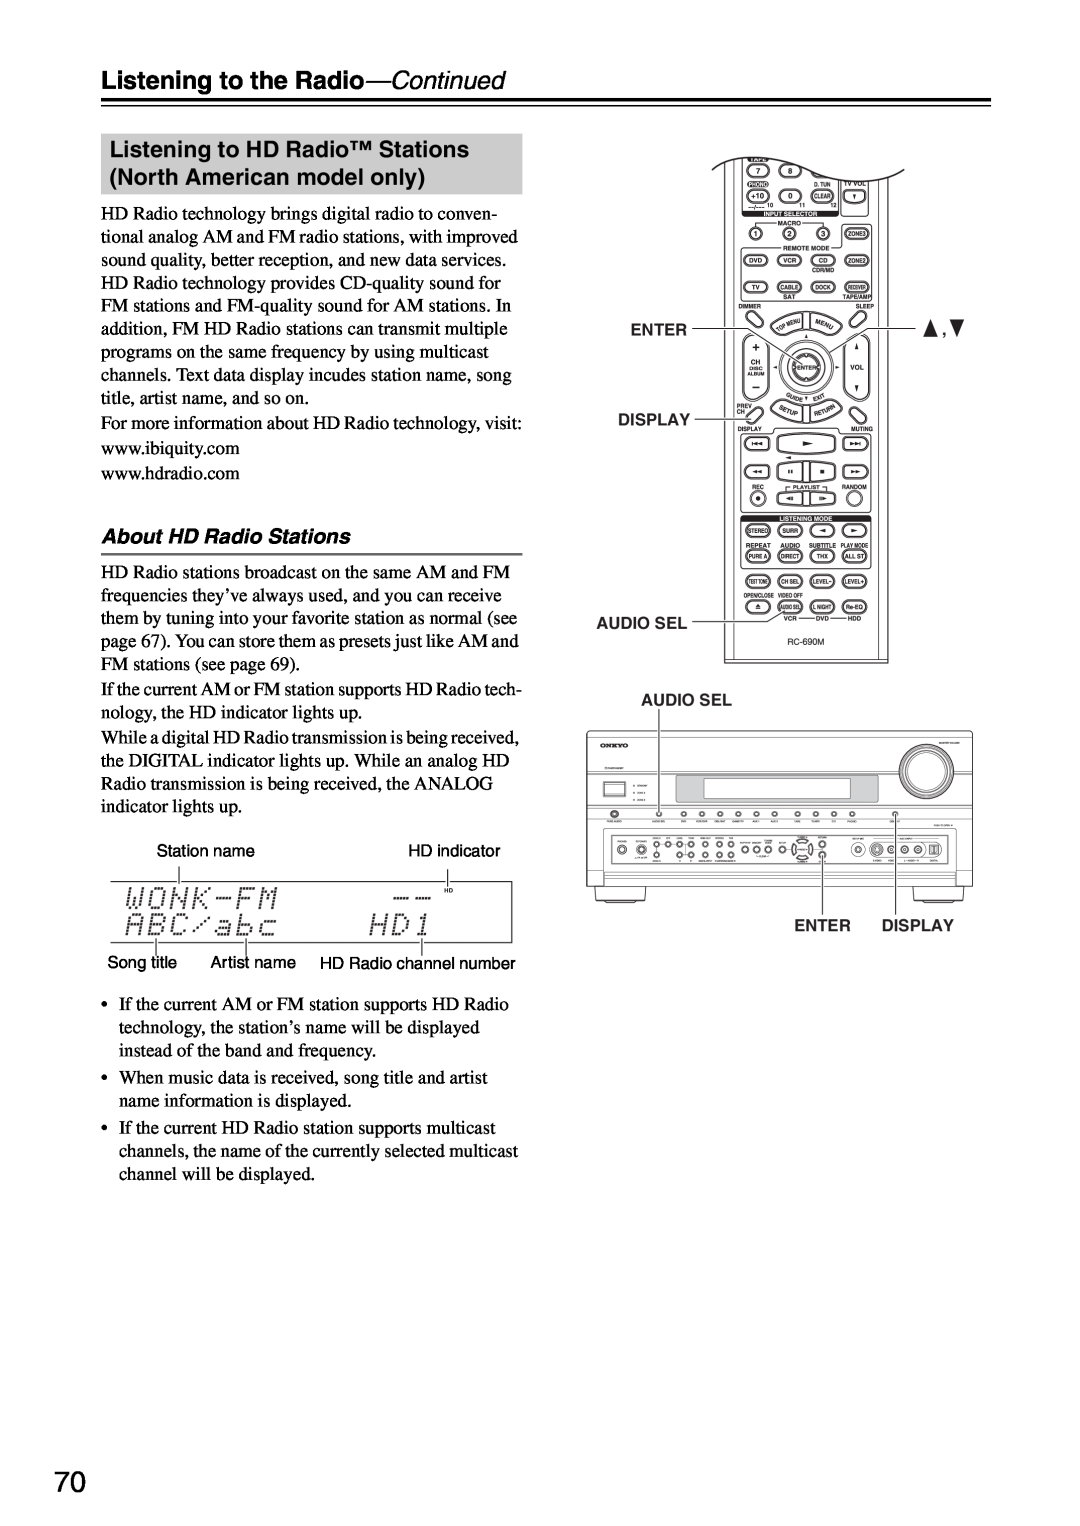 Onkyo PR-SC886 instruction manual About HD Radio Stations, Listening to the Radio—Continued 